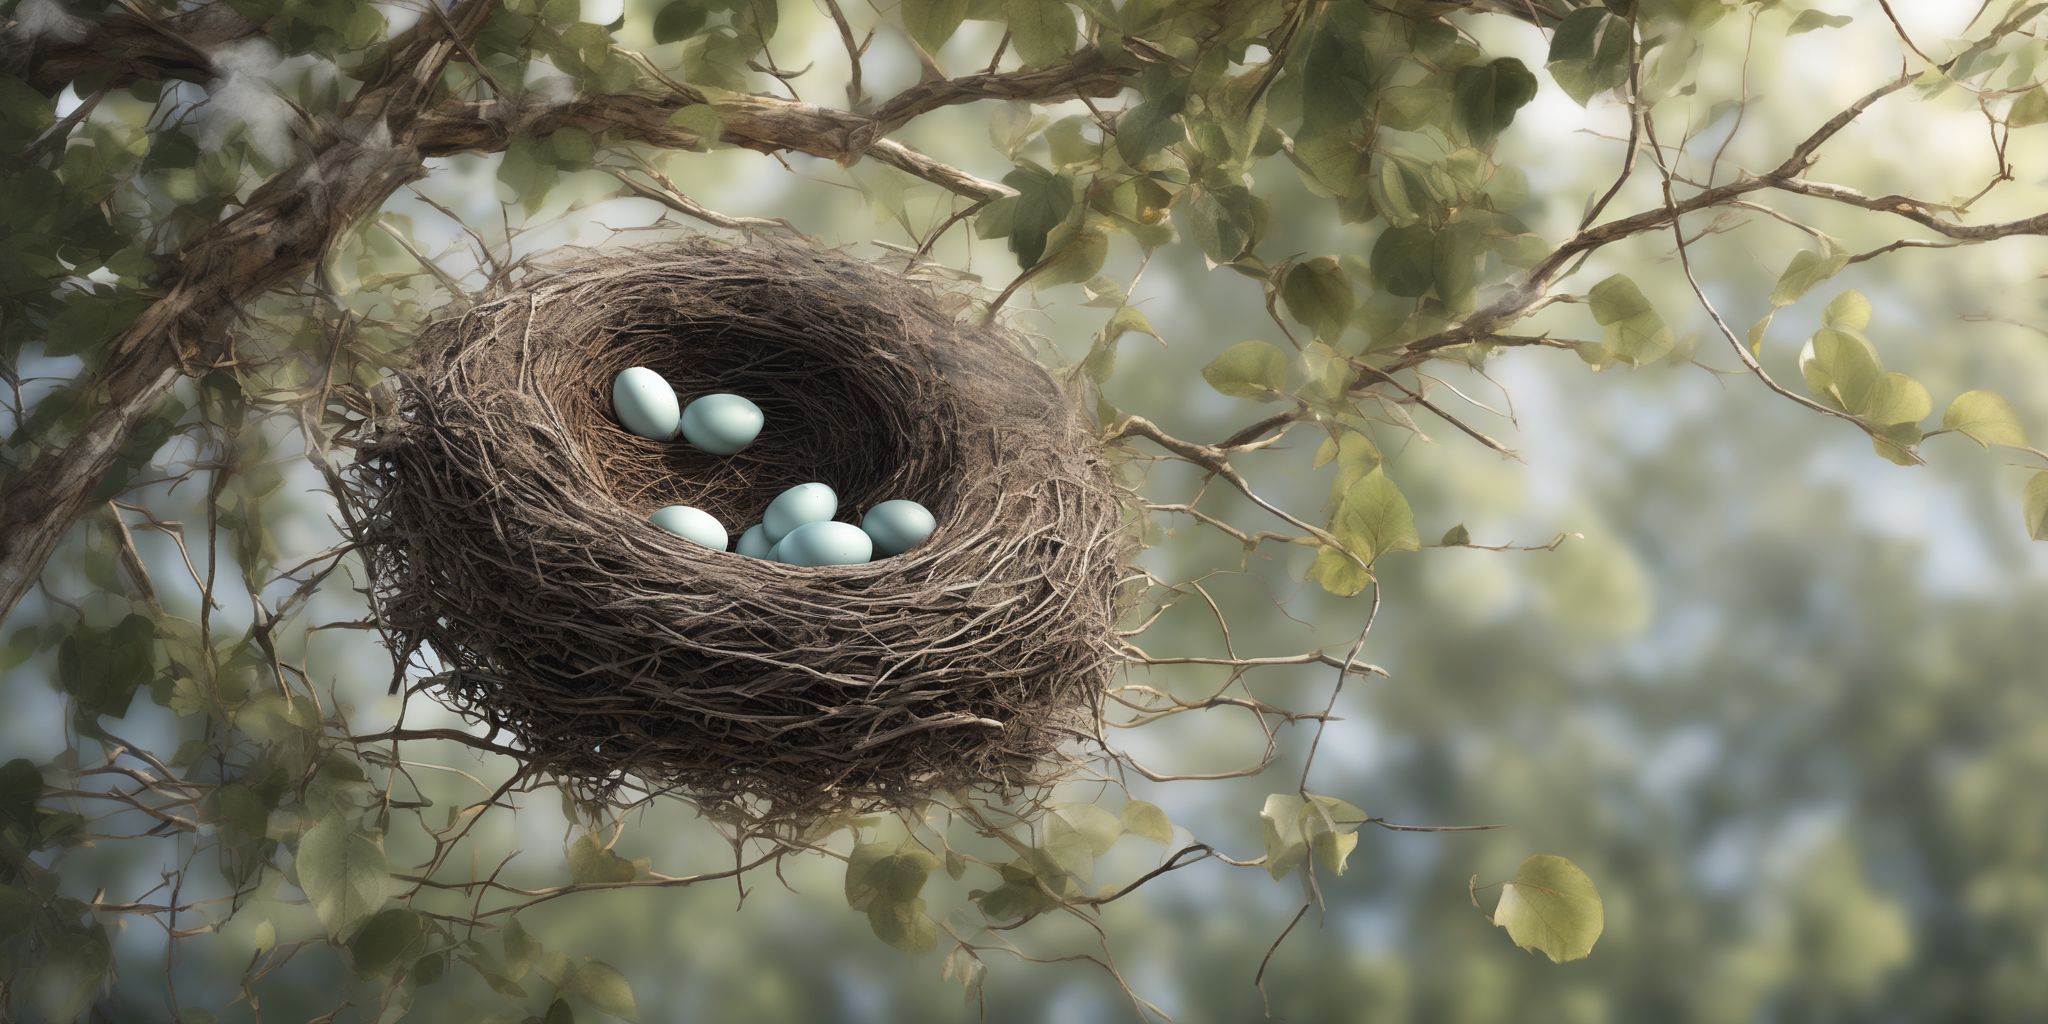 Nest  in realistic, photographic style